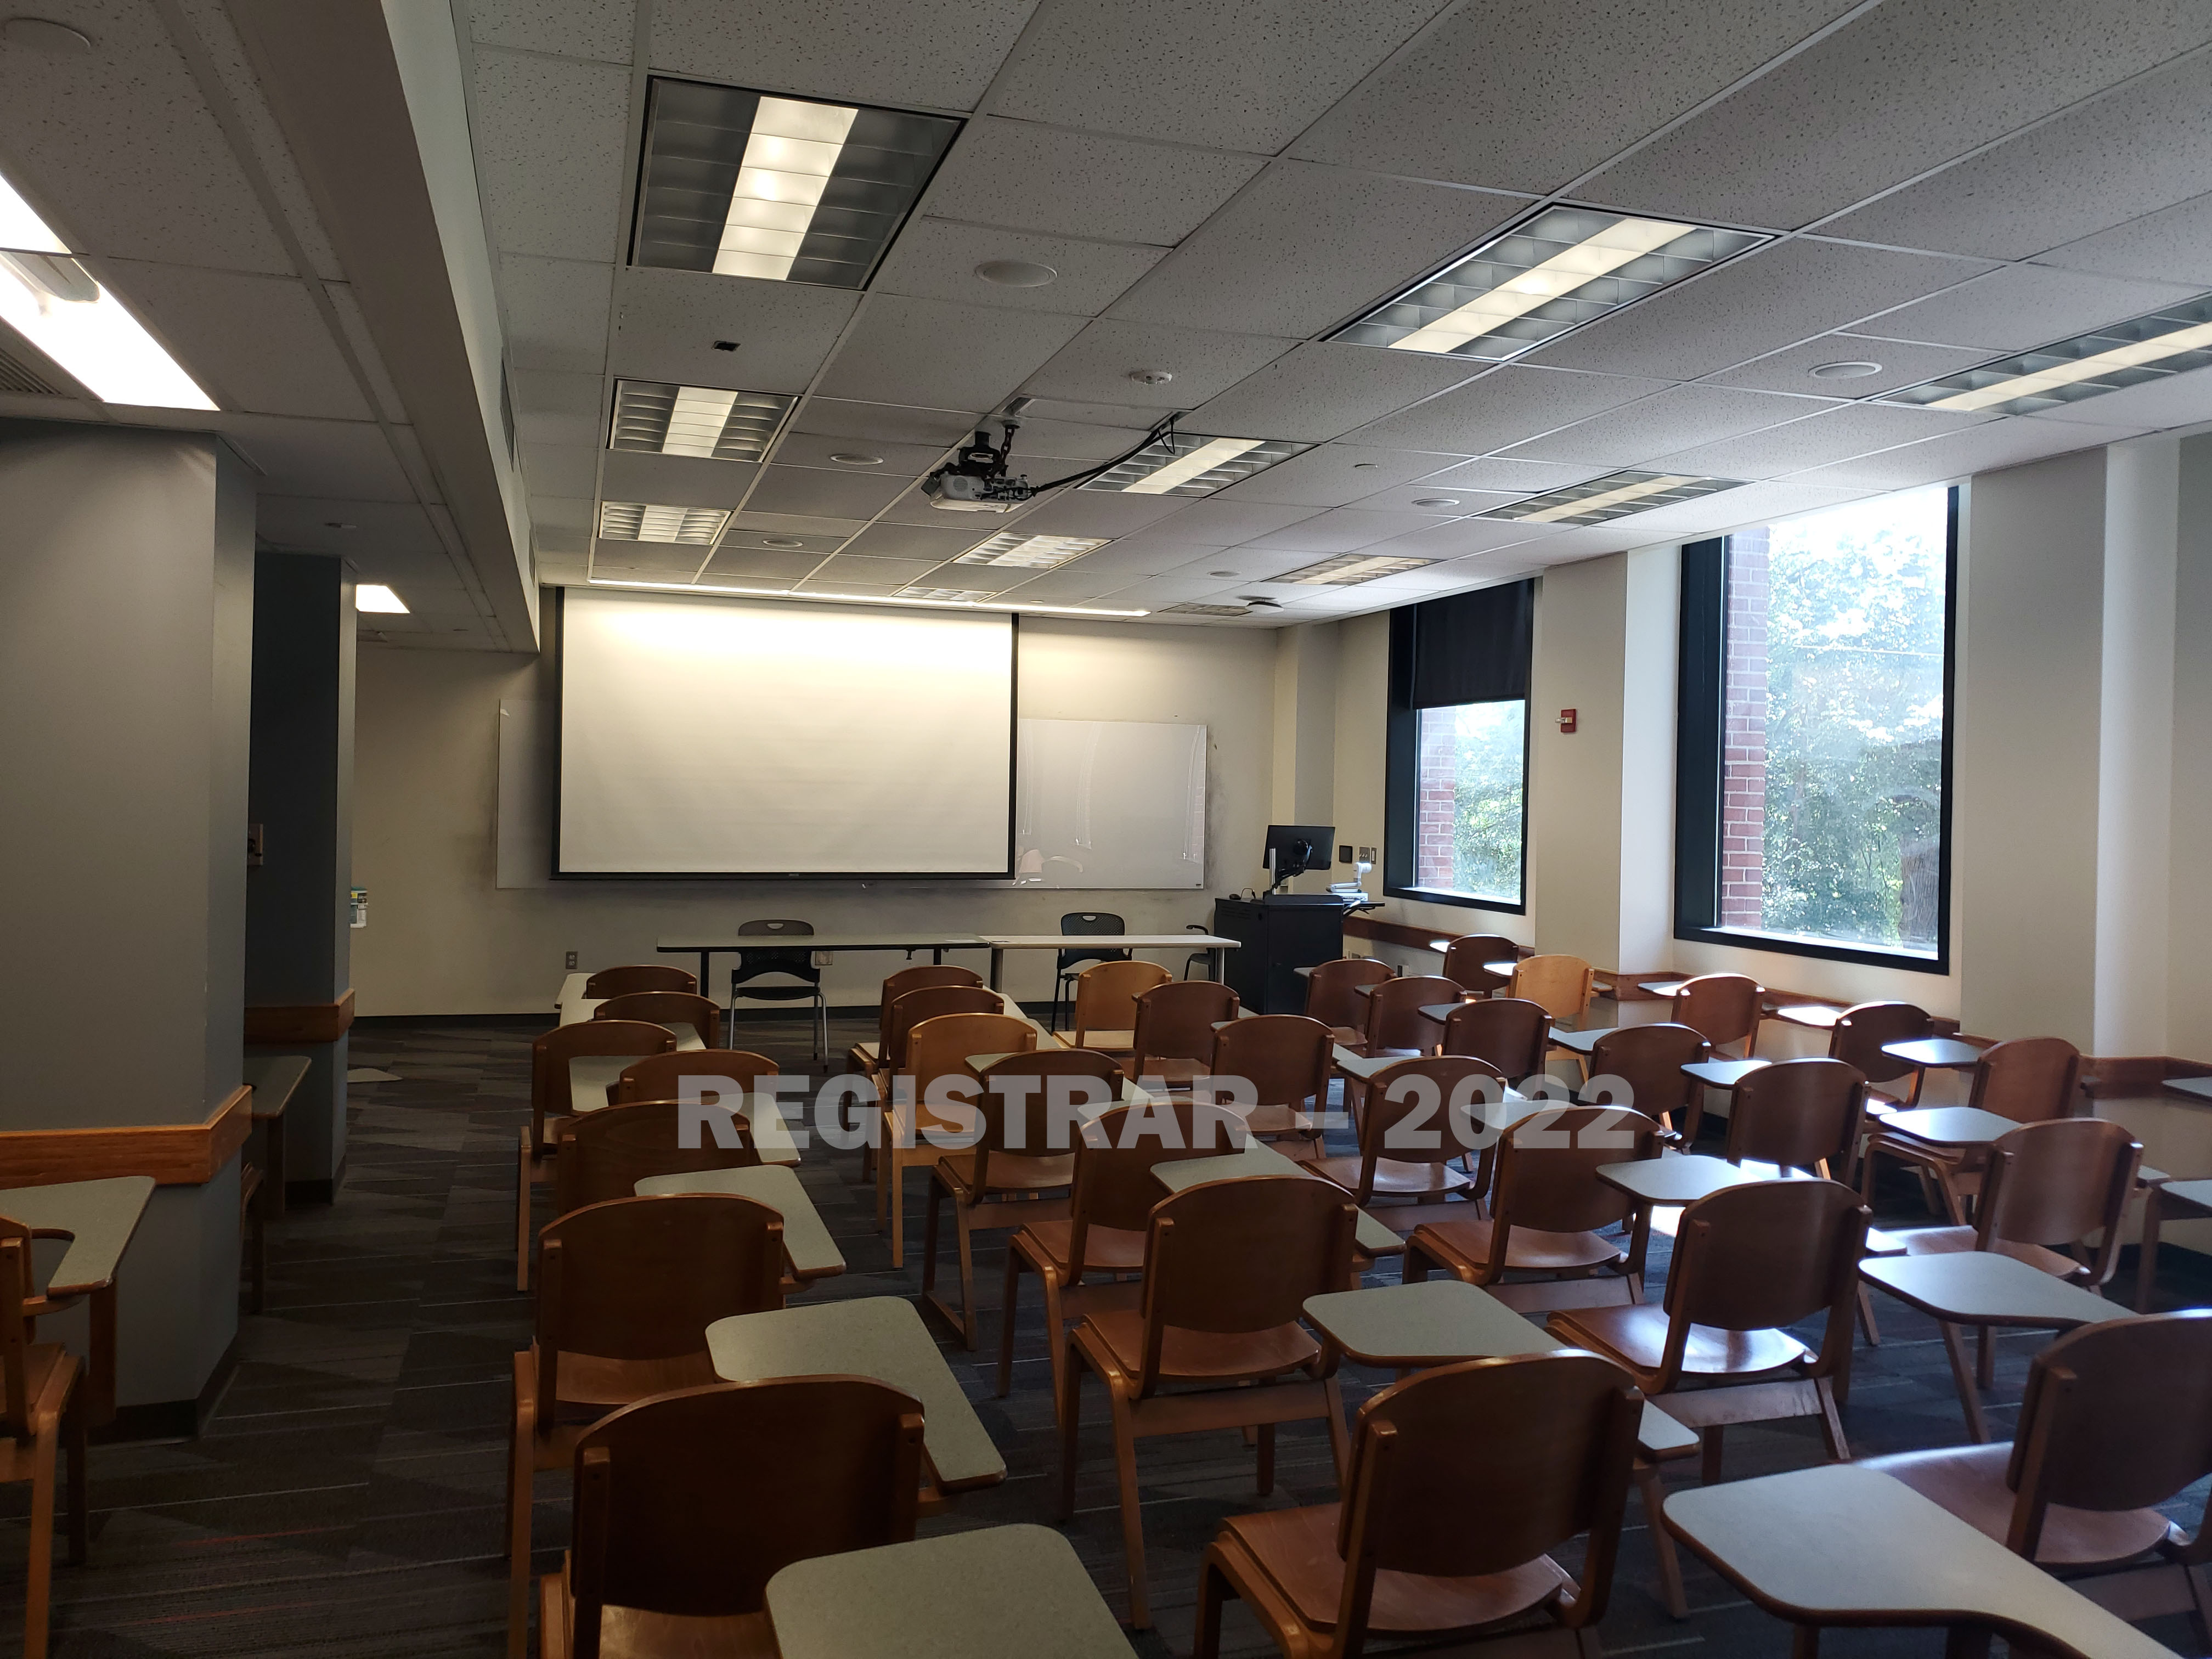 McPherson Chemical Lab room 2019 view from the back of the room with projector screen down